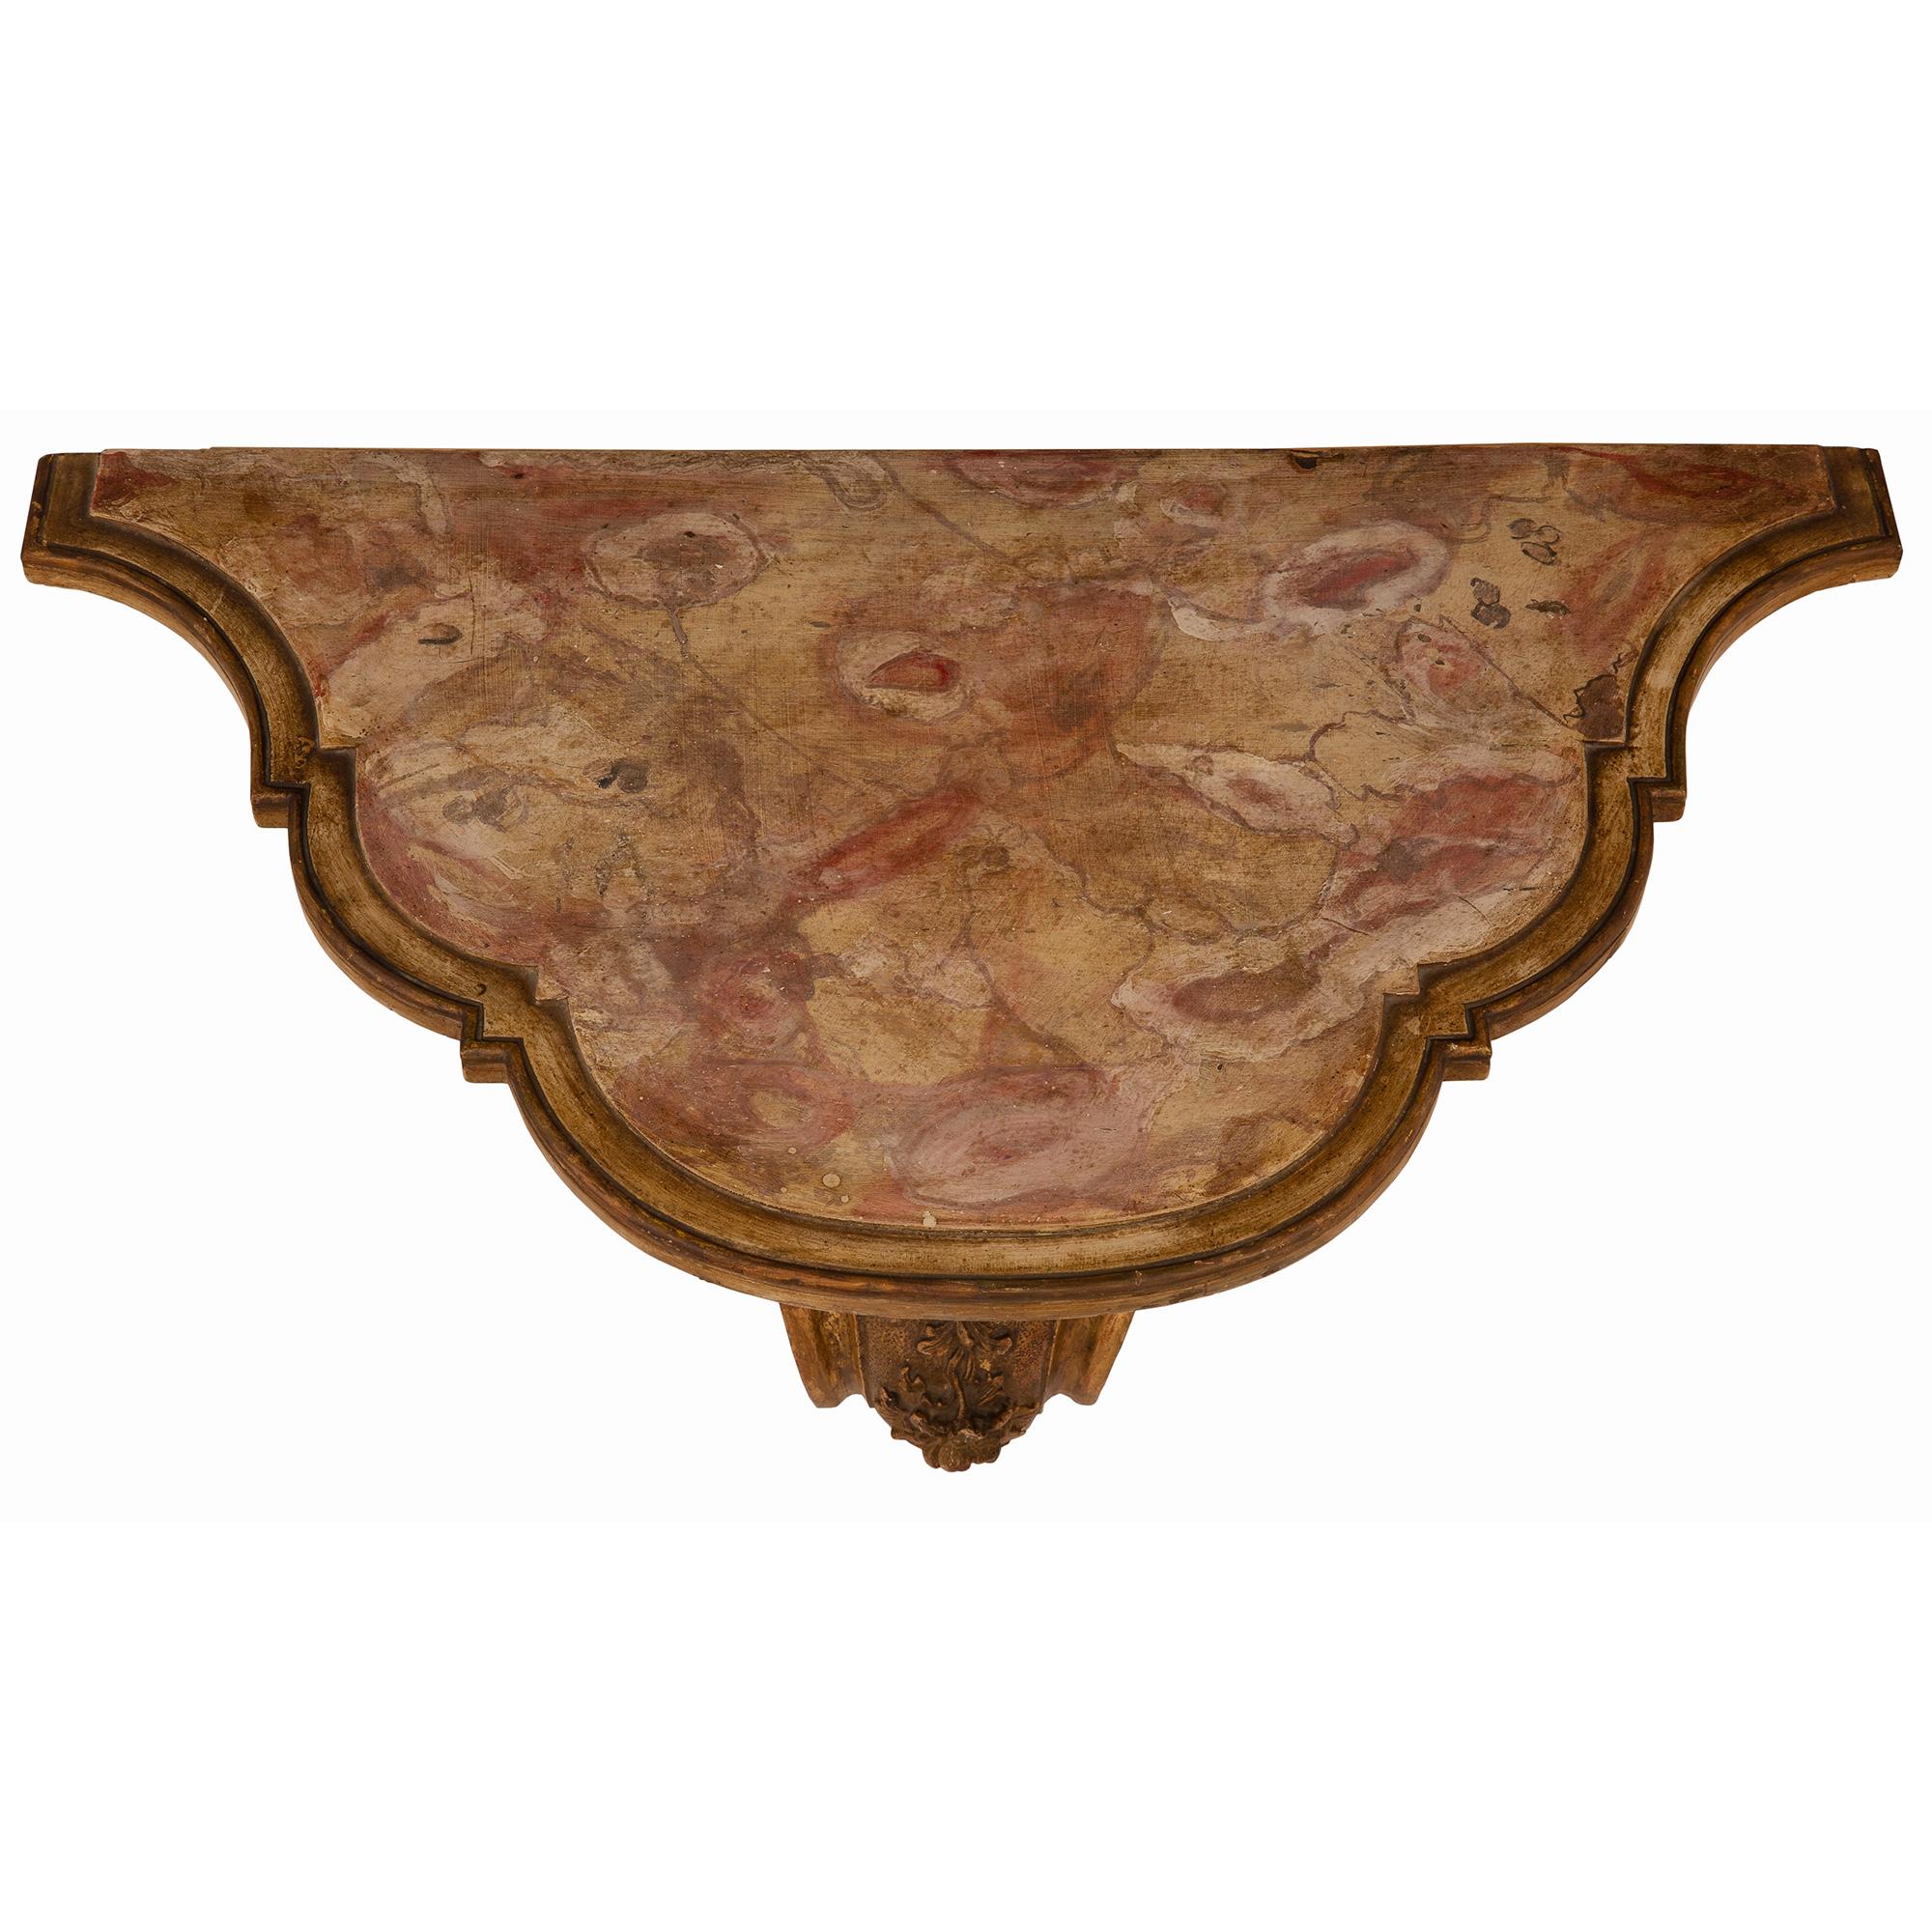 A striking pair of Italian 19th Century Venetian Mecca and faux painted wall brackets. Each wall bracket is raised by a large beautiful scrolled back support with luxuriant foliate movements. A lovely hammered design extends throughout leading